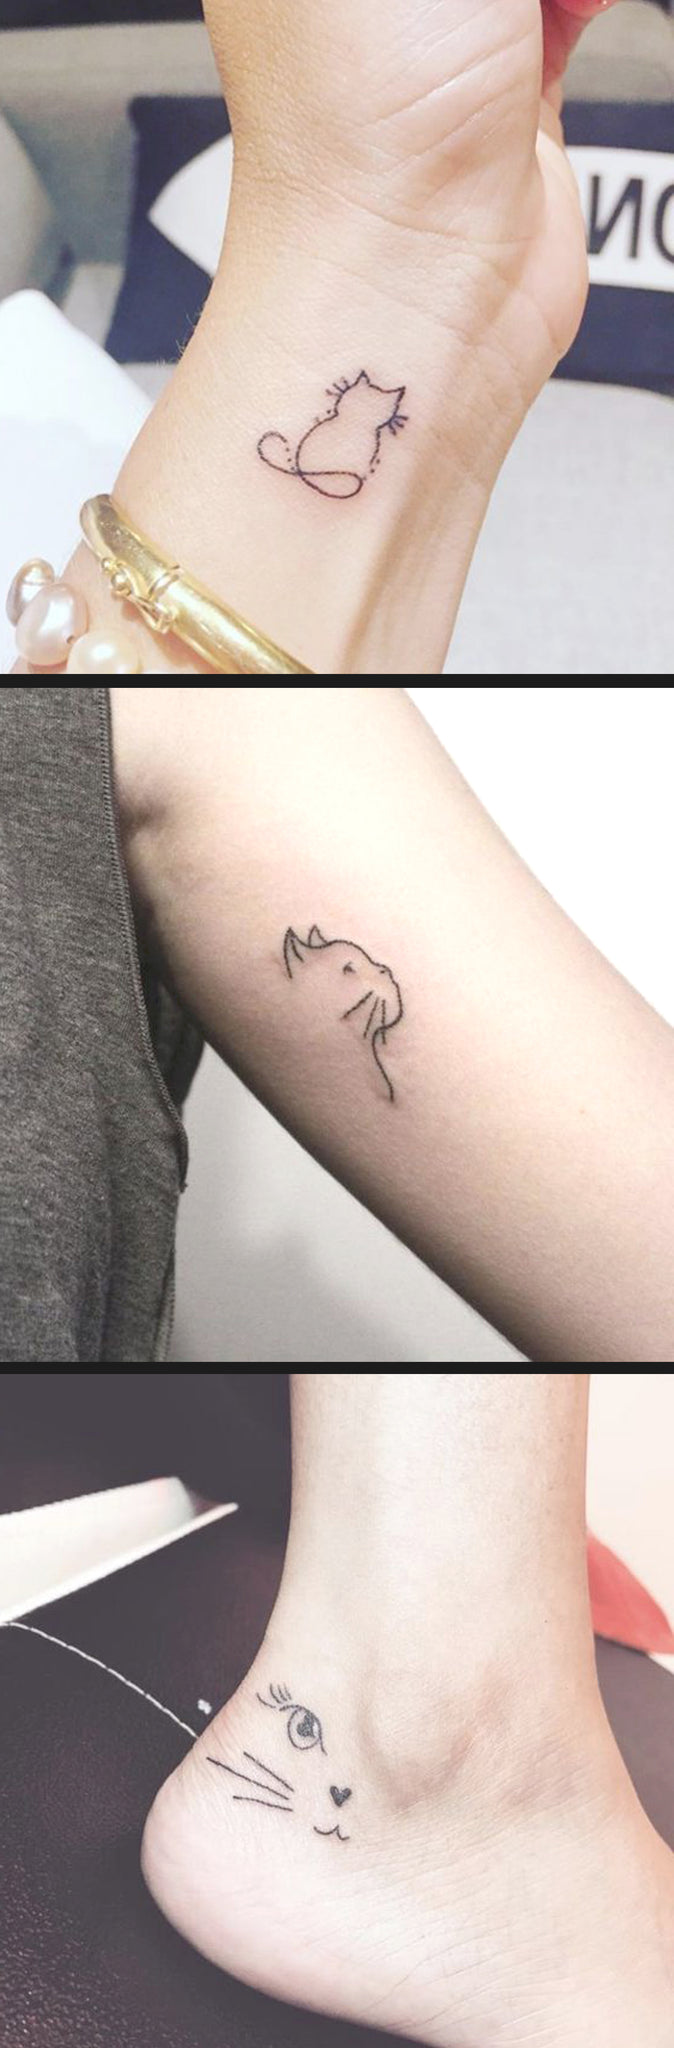 15 Meaningful Tattoos That Will Convince You To Get Inked | Preview.ph